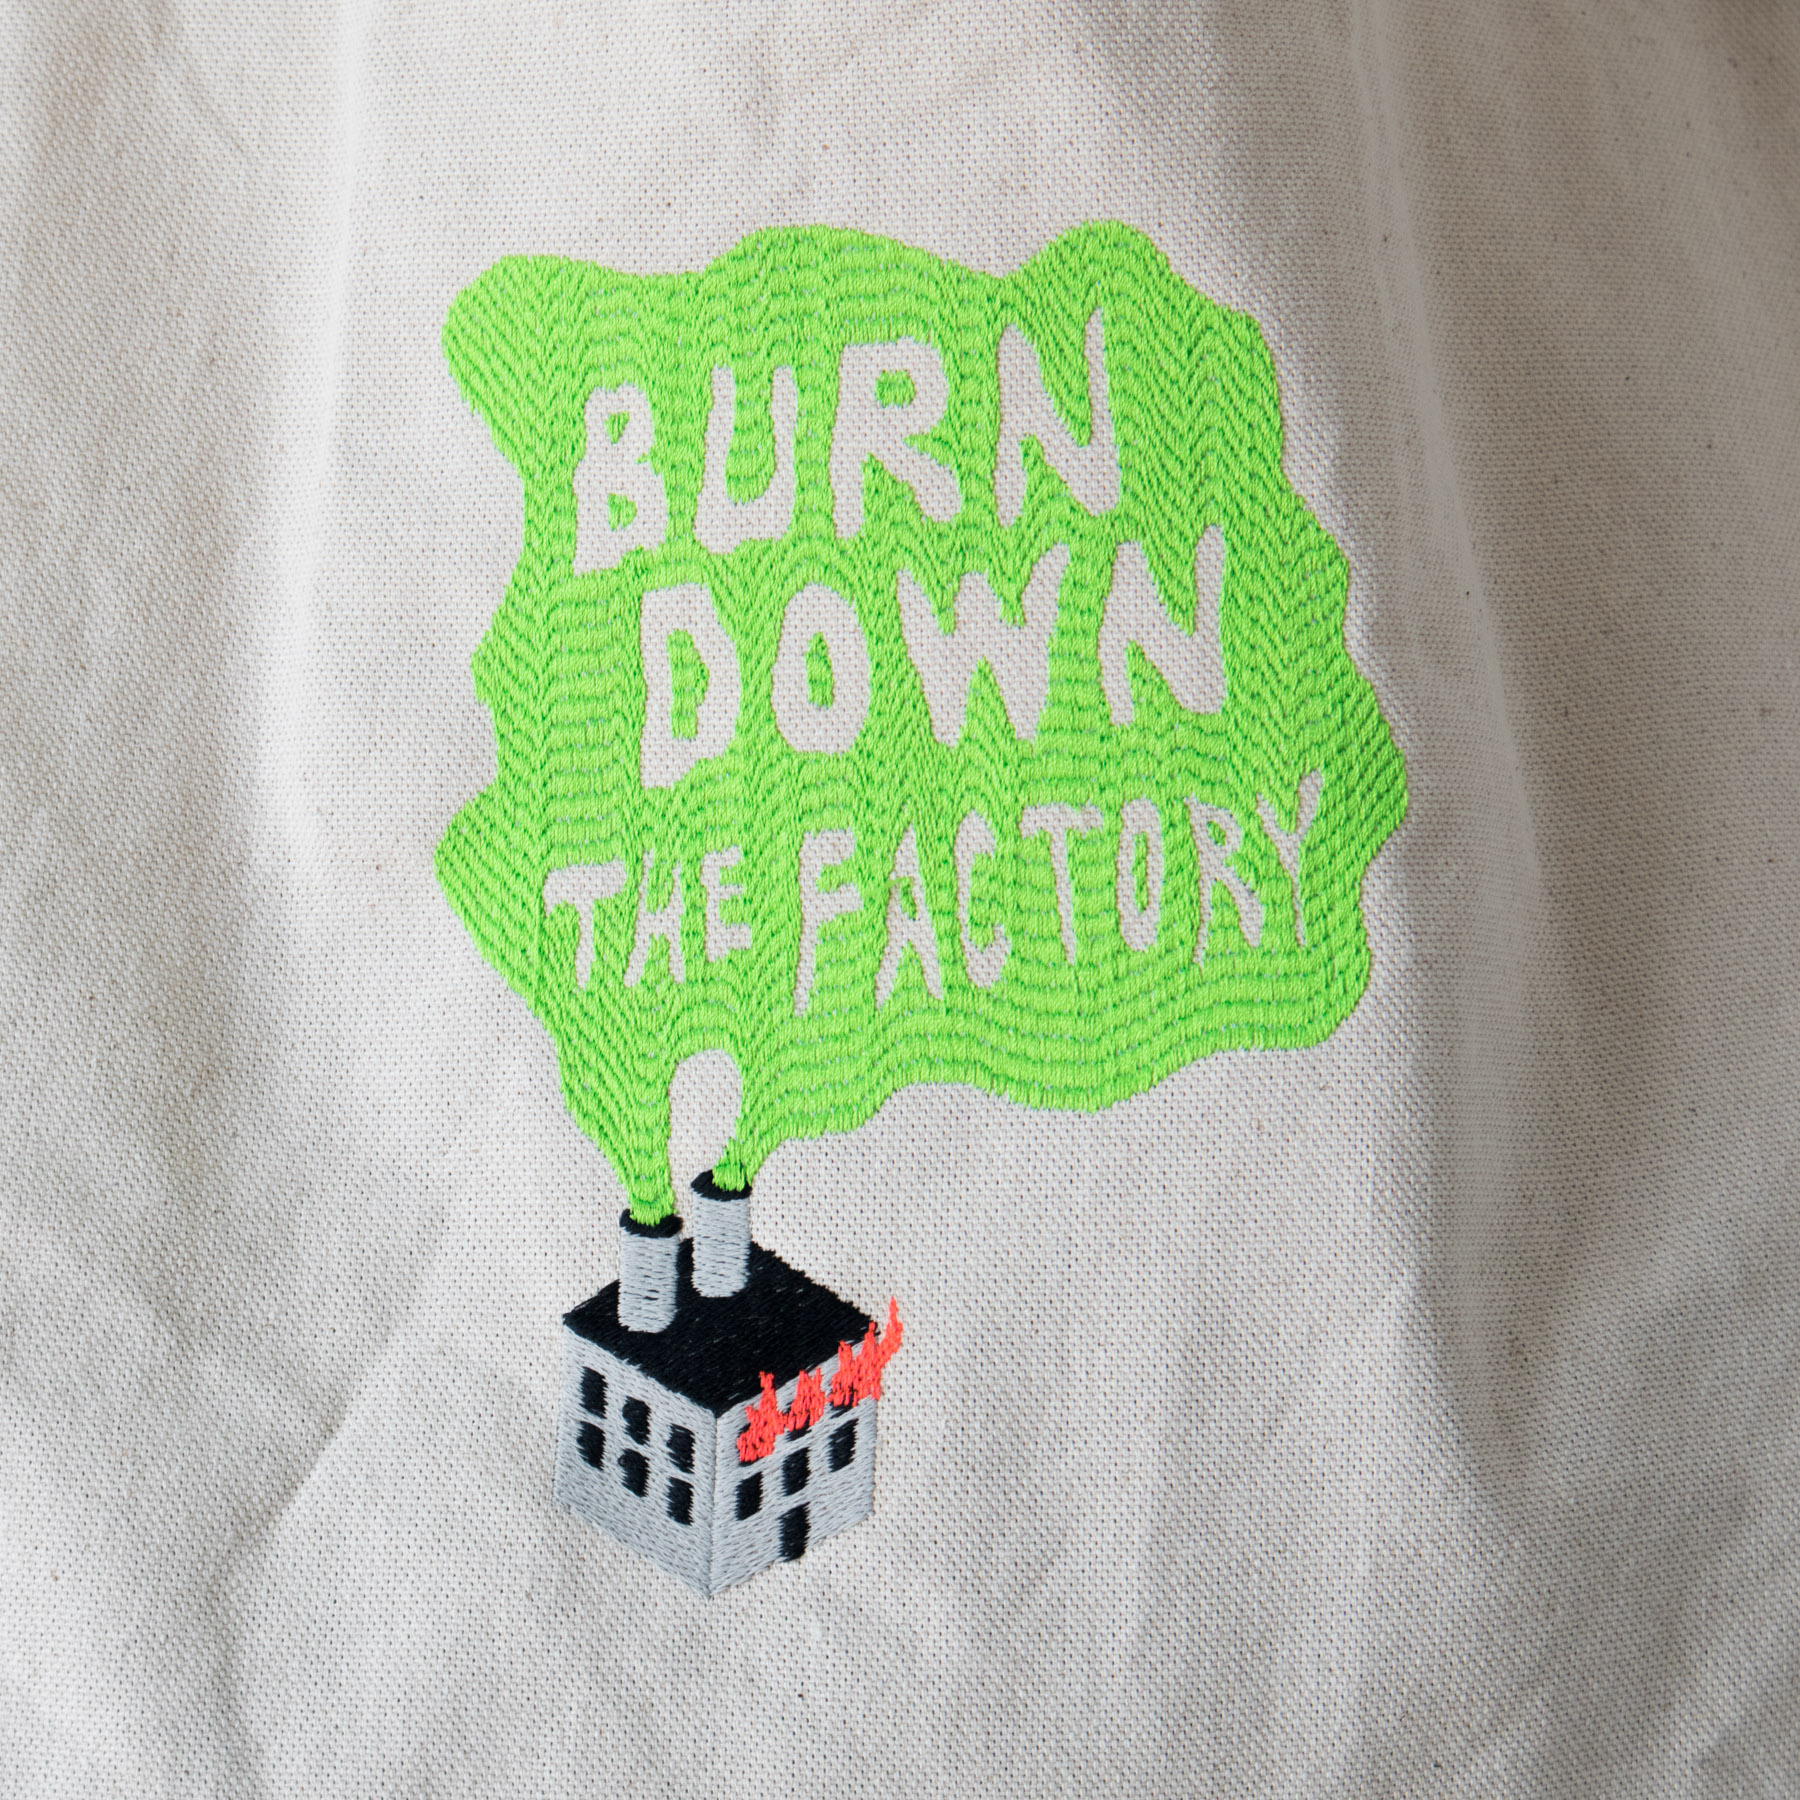 Product image - canvas tote bag with Burn Down the Factory embroidery design detail